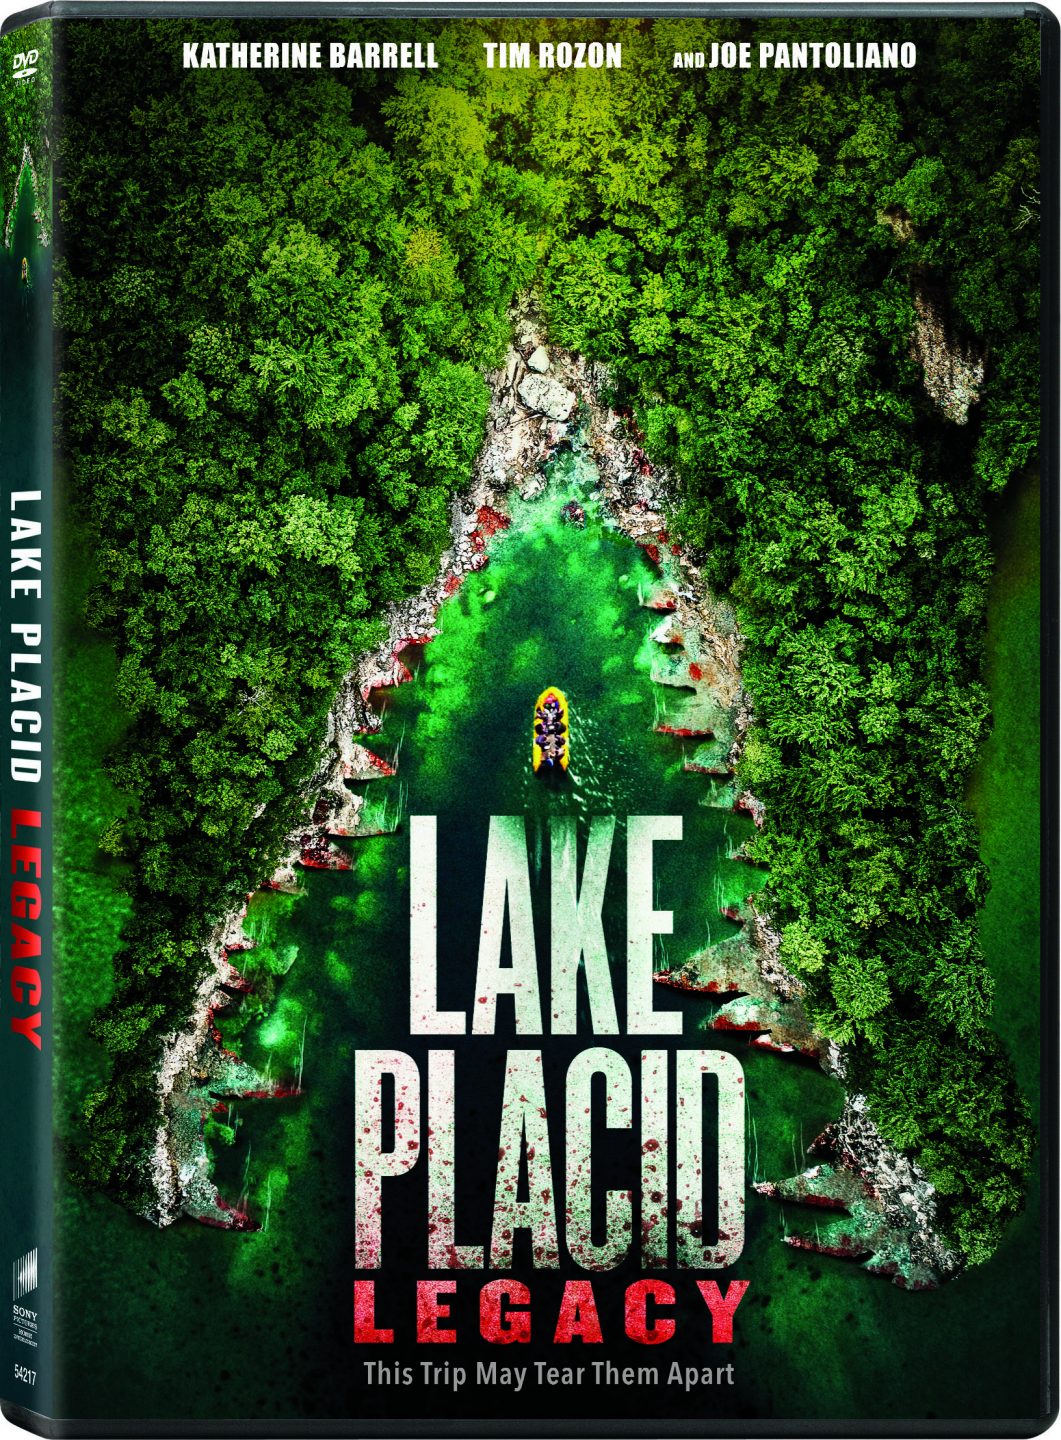 Lake Placid: Legacy DVD cover (Sony Pictures Home Entertainment)